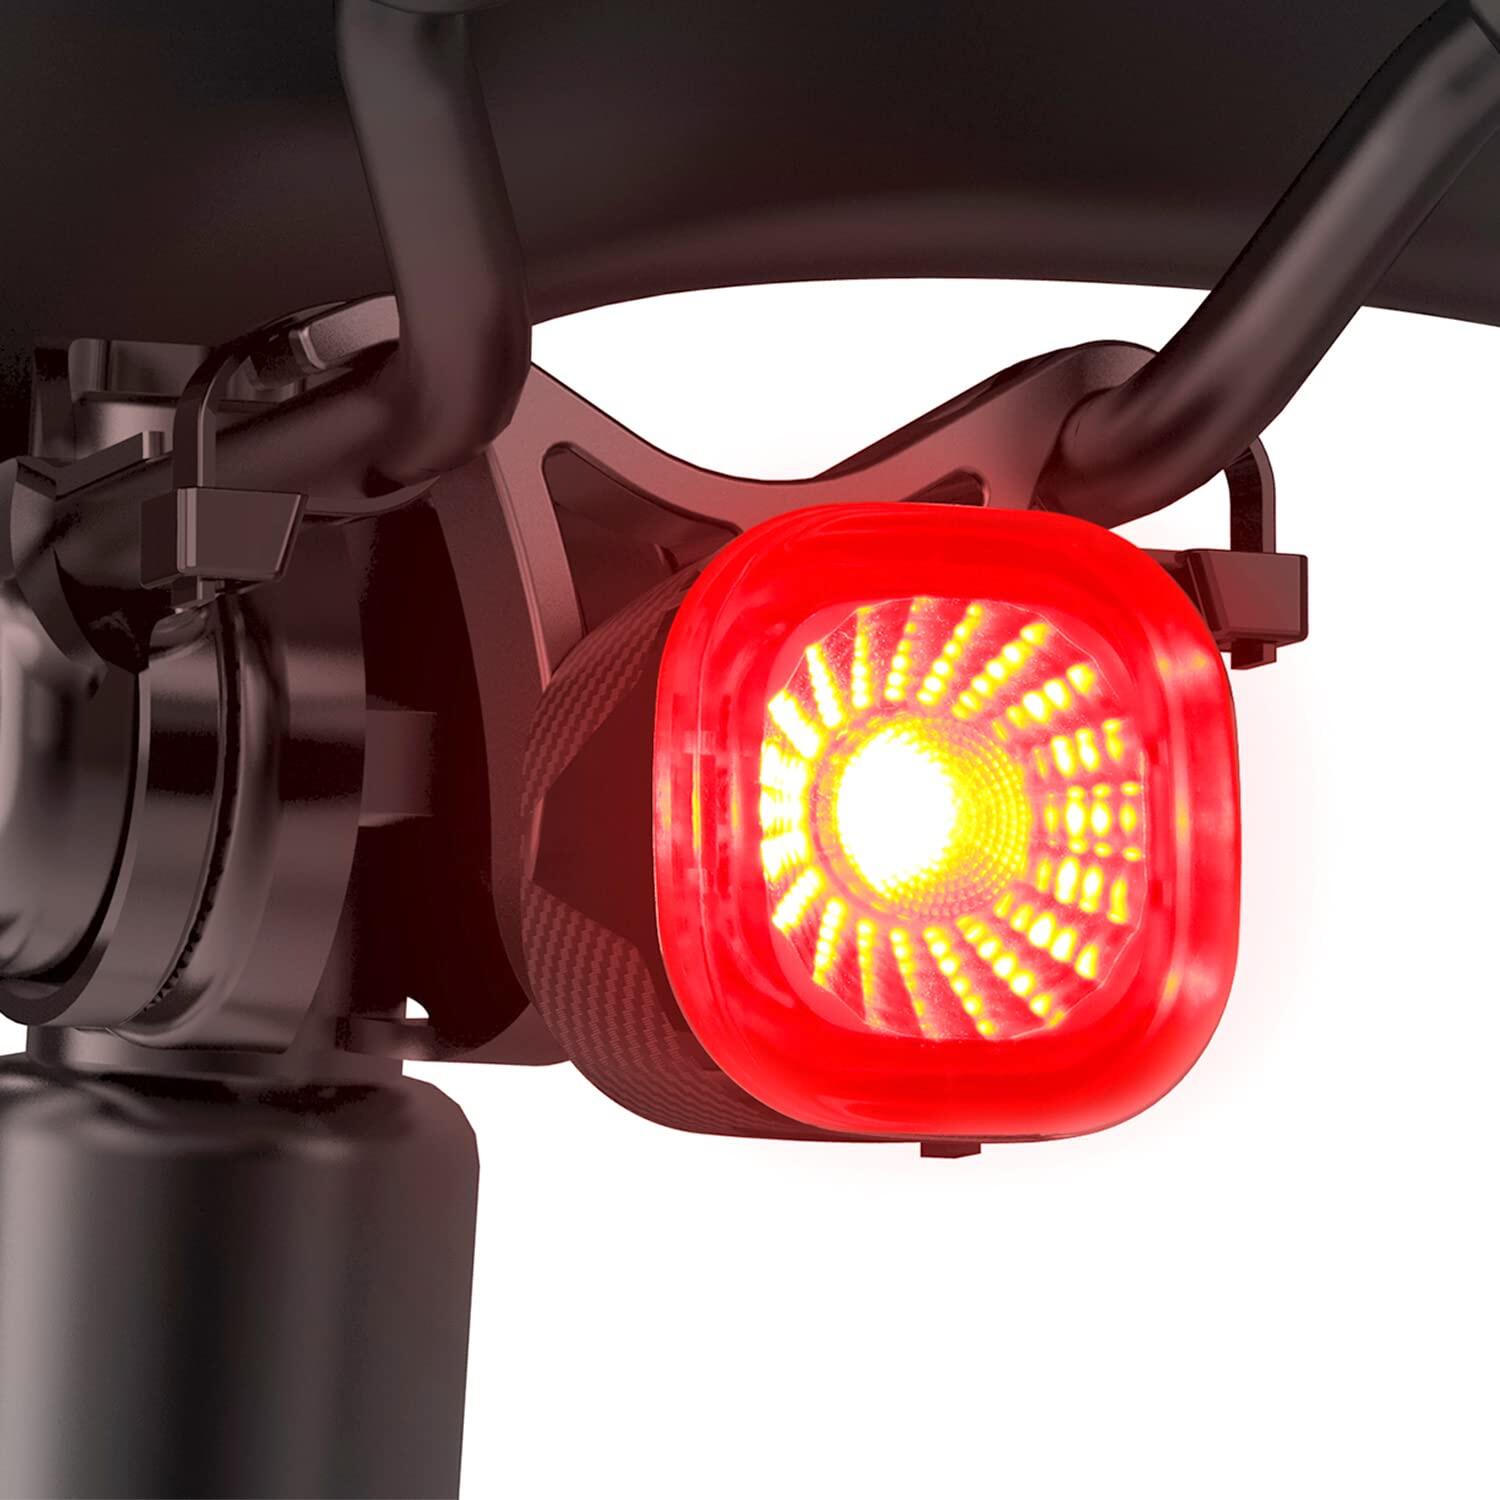 Customize Your Bicycle with a Flashing Tail Light for Enhanced Safety